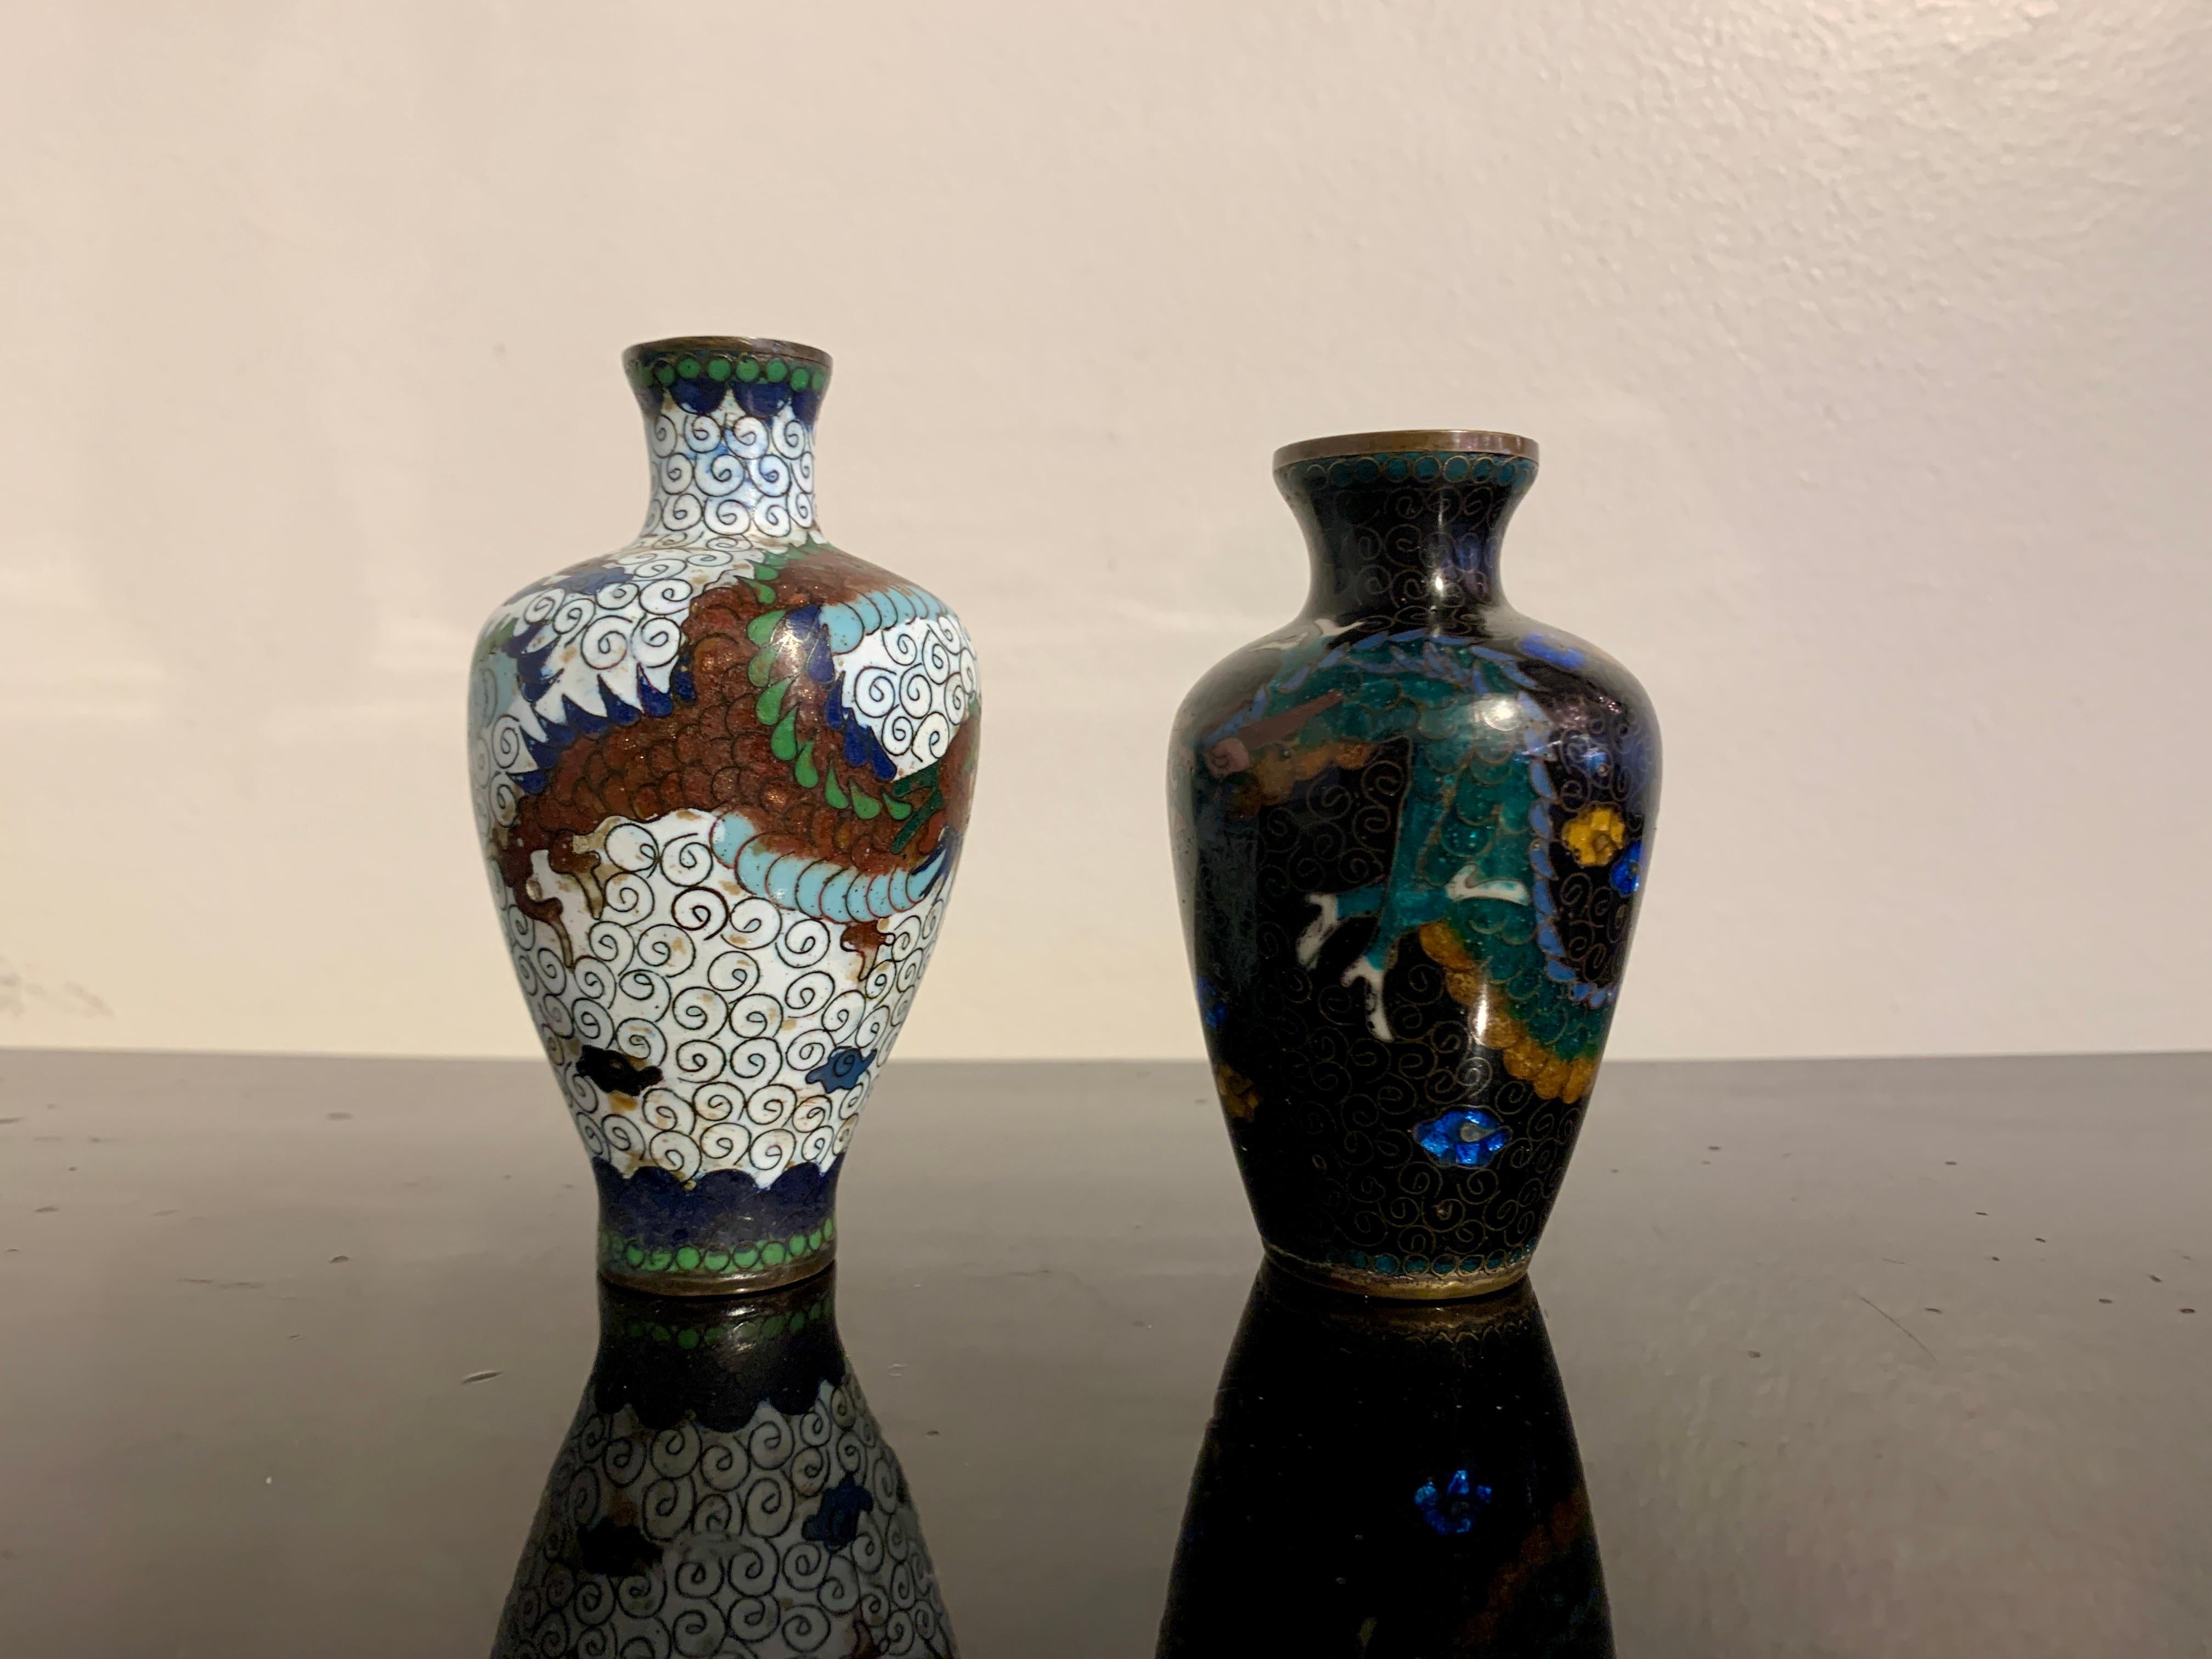 Two charming, small Japanese cloisonné dragon vases, Meiji to Taisho period, early 20th century, Japan. 

The miniature vases of baluster form, with tapering ovoid bodies, high shoulders, short necks, and slightly everted mouths. The small vases